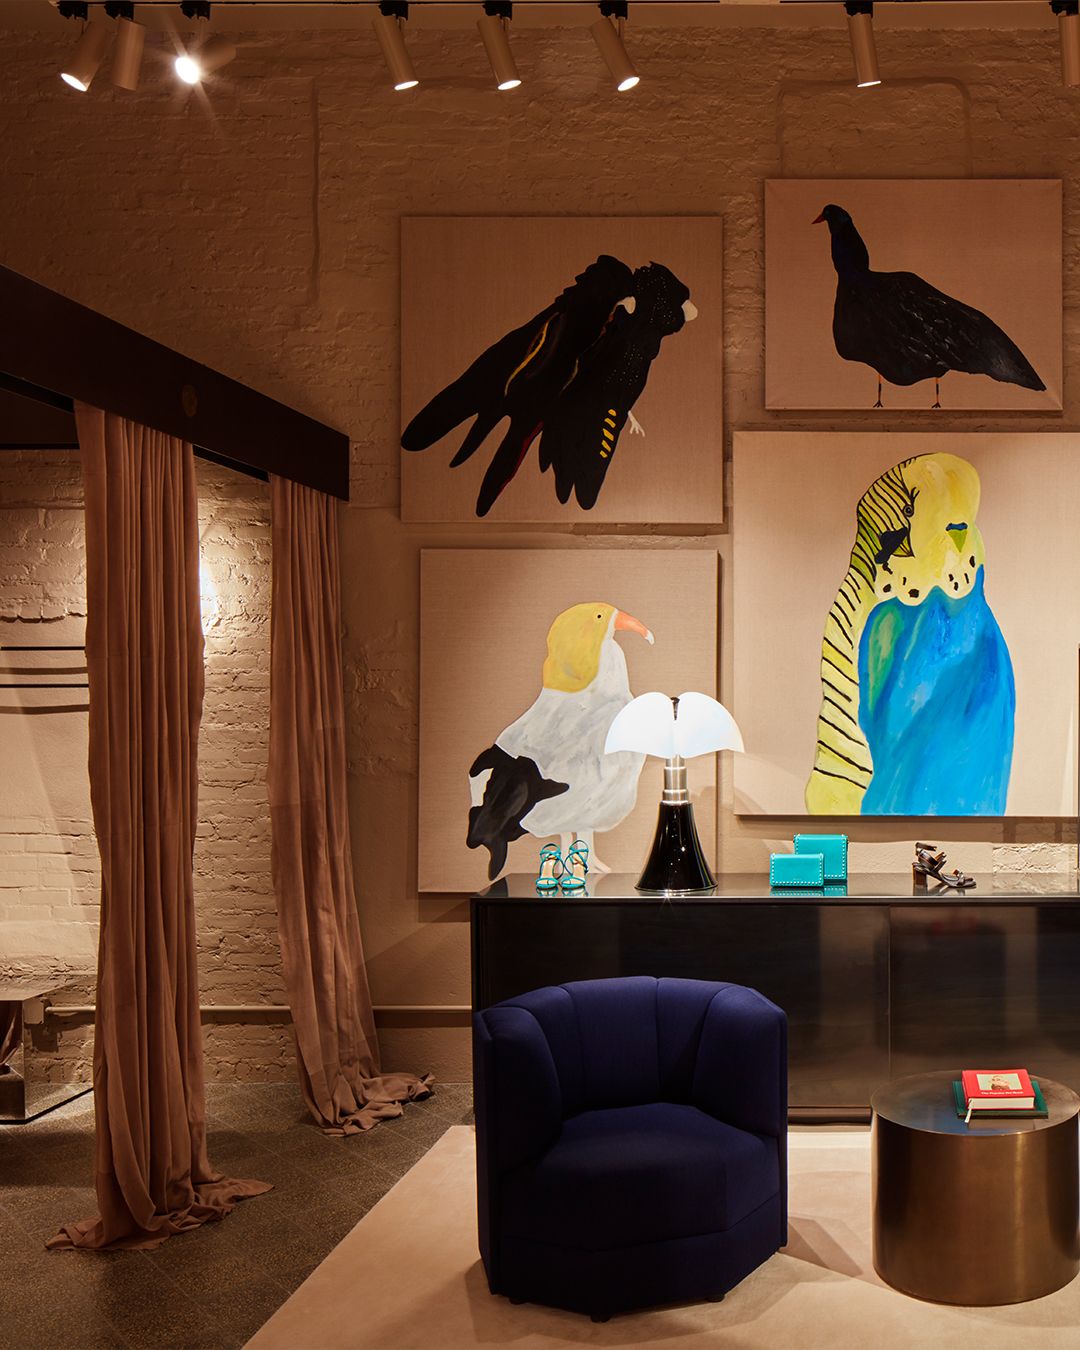 Boutique interior with four large paintings of birds, fitting rooms, a blue velvet chair and display counter with accessories